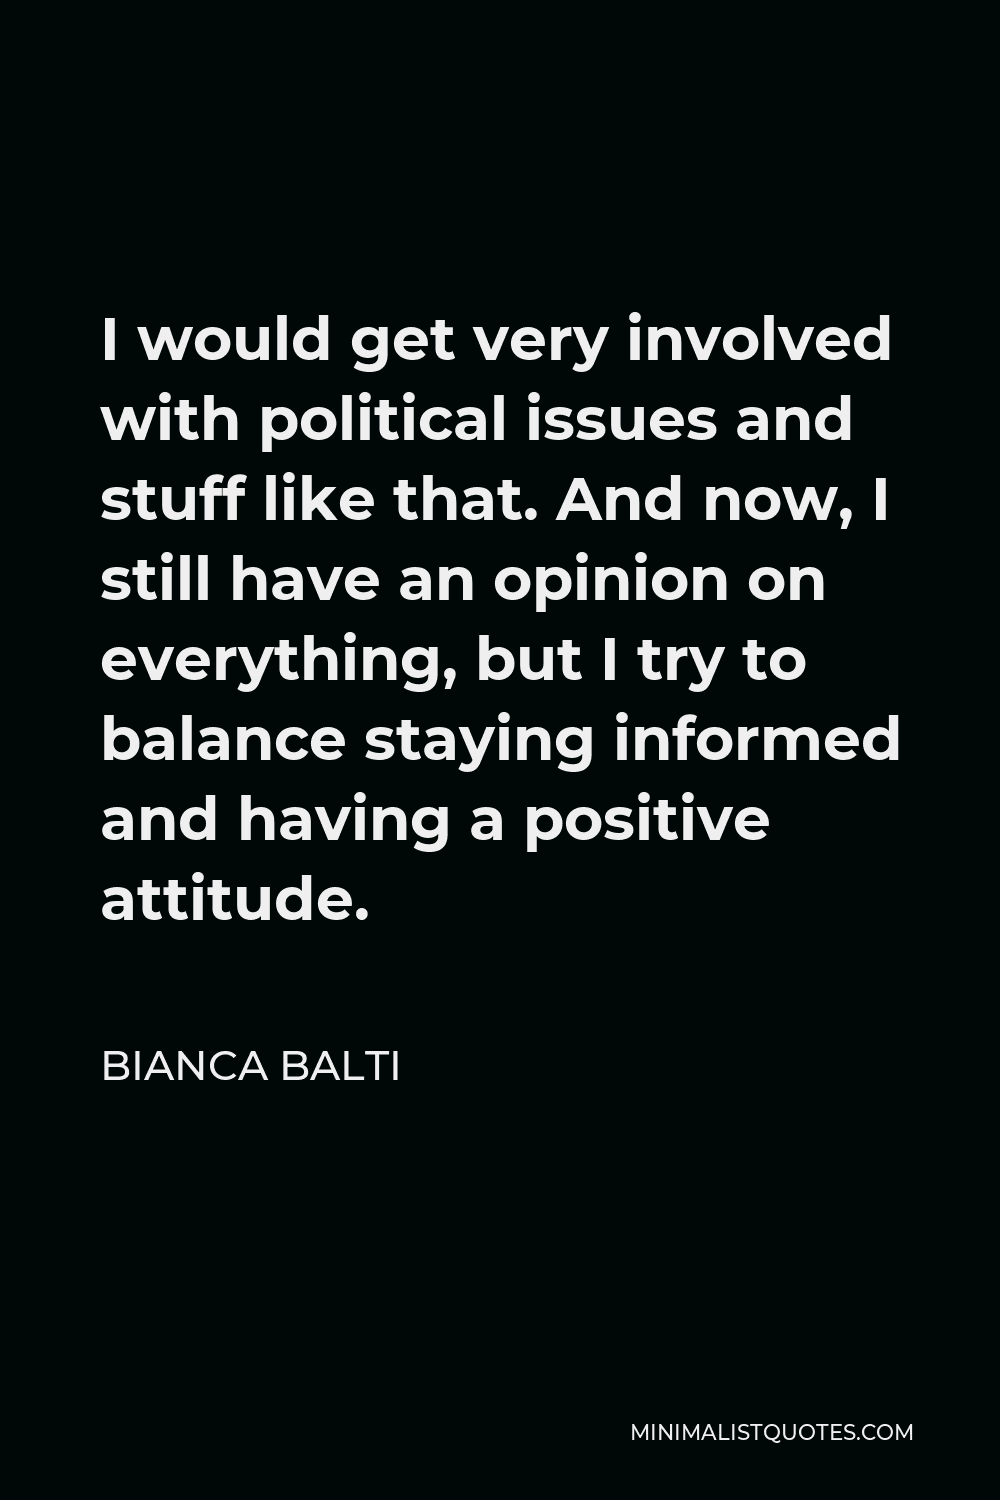 Bianca Balti Quote - I would get very involved with political issues and stuff like that. And now, I still have an opinion on everything, but I try to balance staying informed and having a positive attitude.